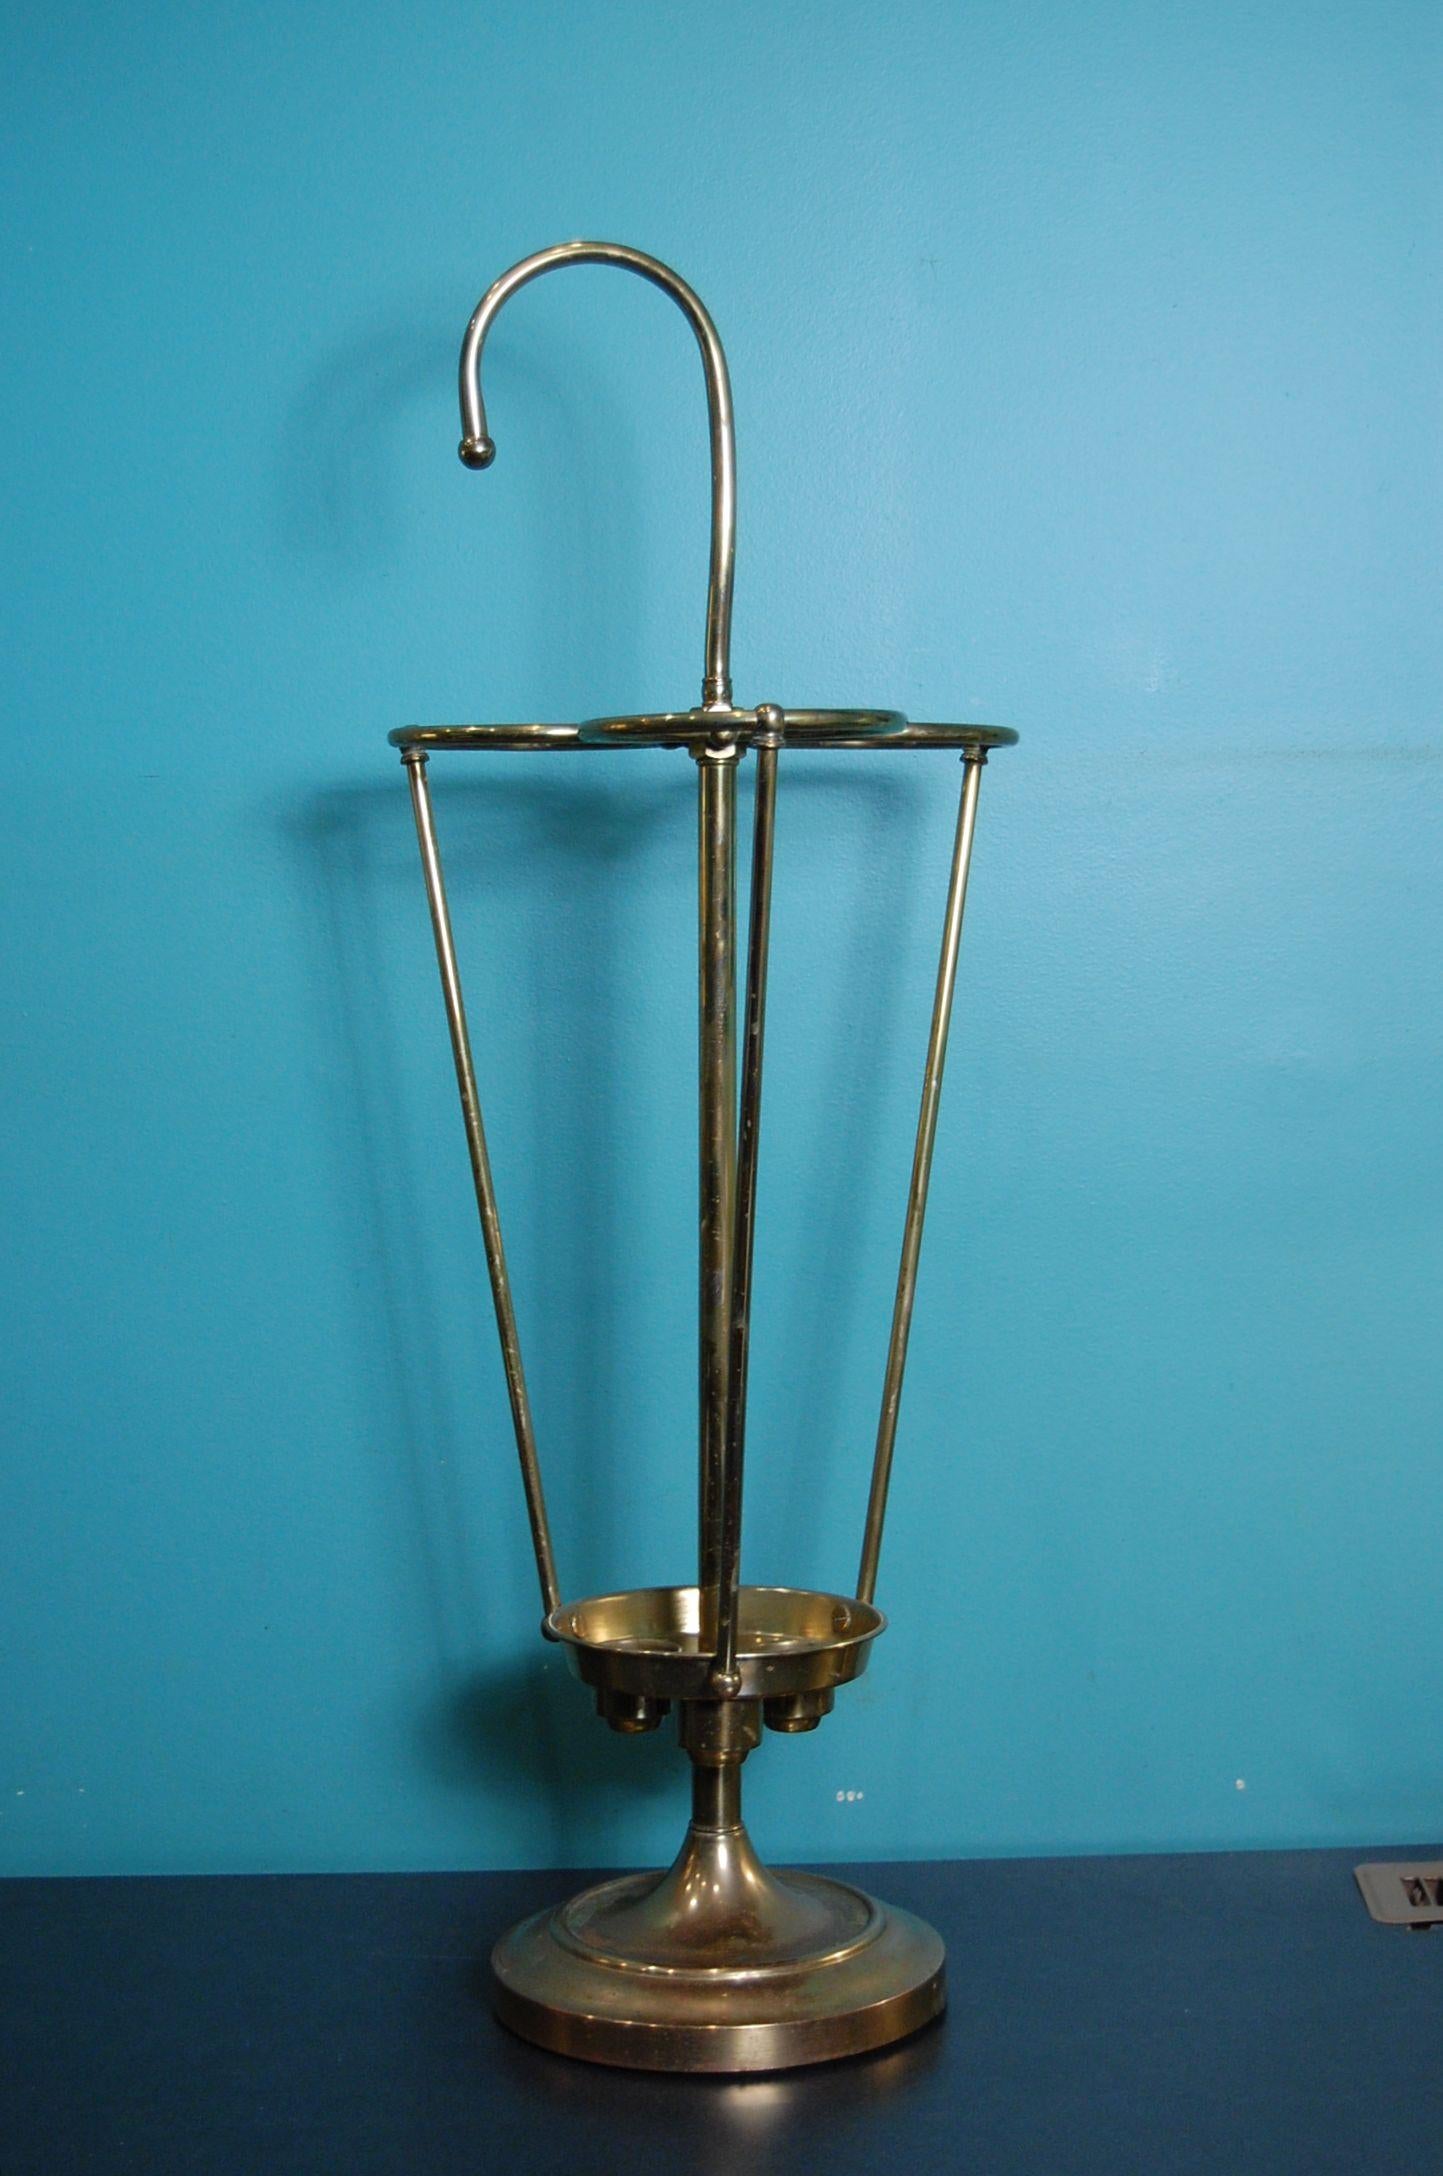 A brass umbrella Stand by the Herco Art Manufacturing Company in solid tubular construction holding three umbrellas (umbrellas not inc). The vertical posts, handle and three rings still retain much of the polished look, however the base has